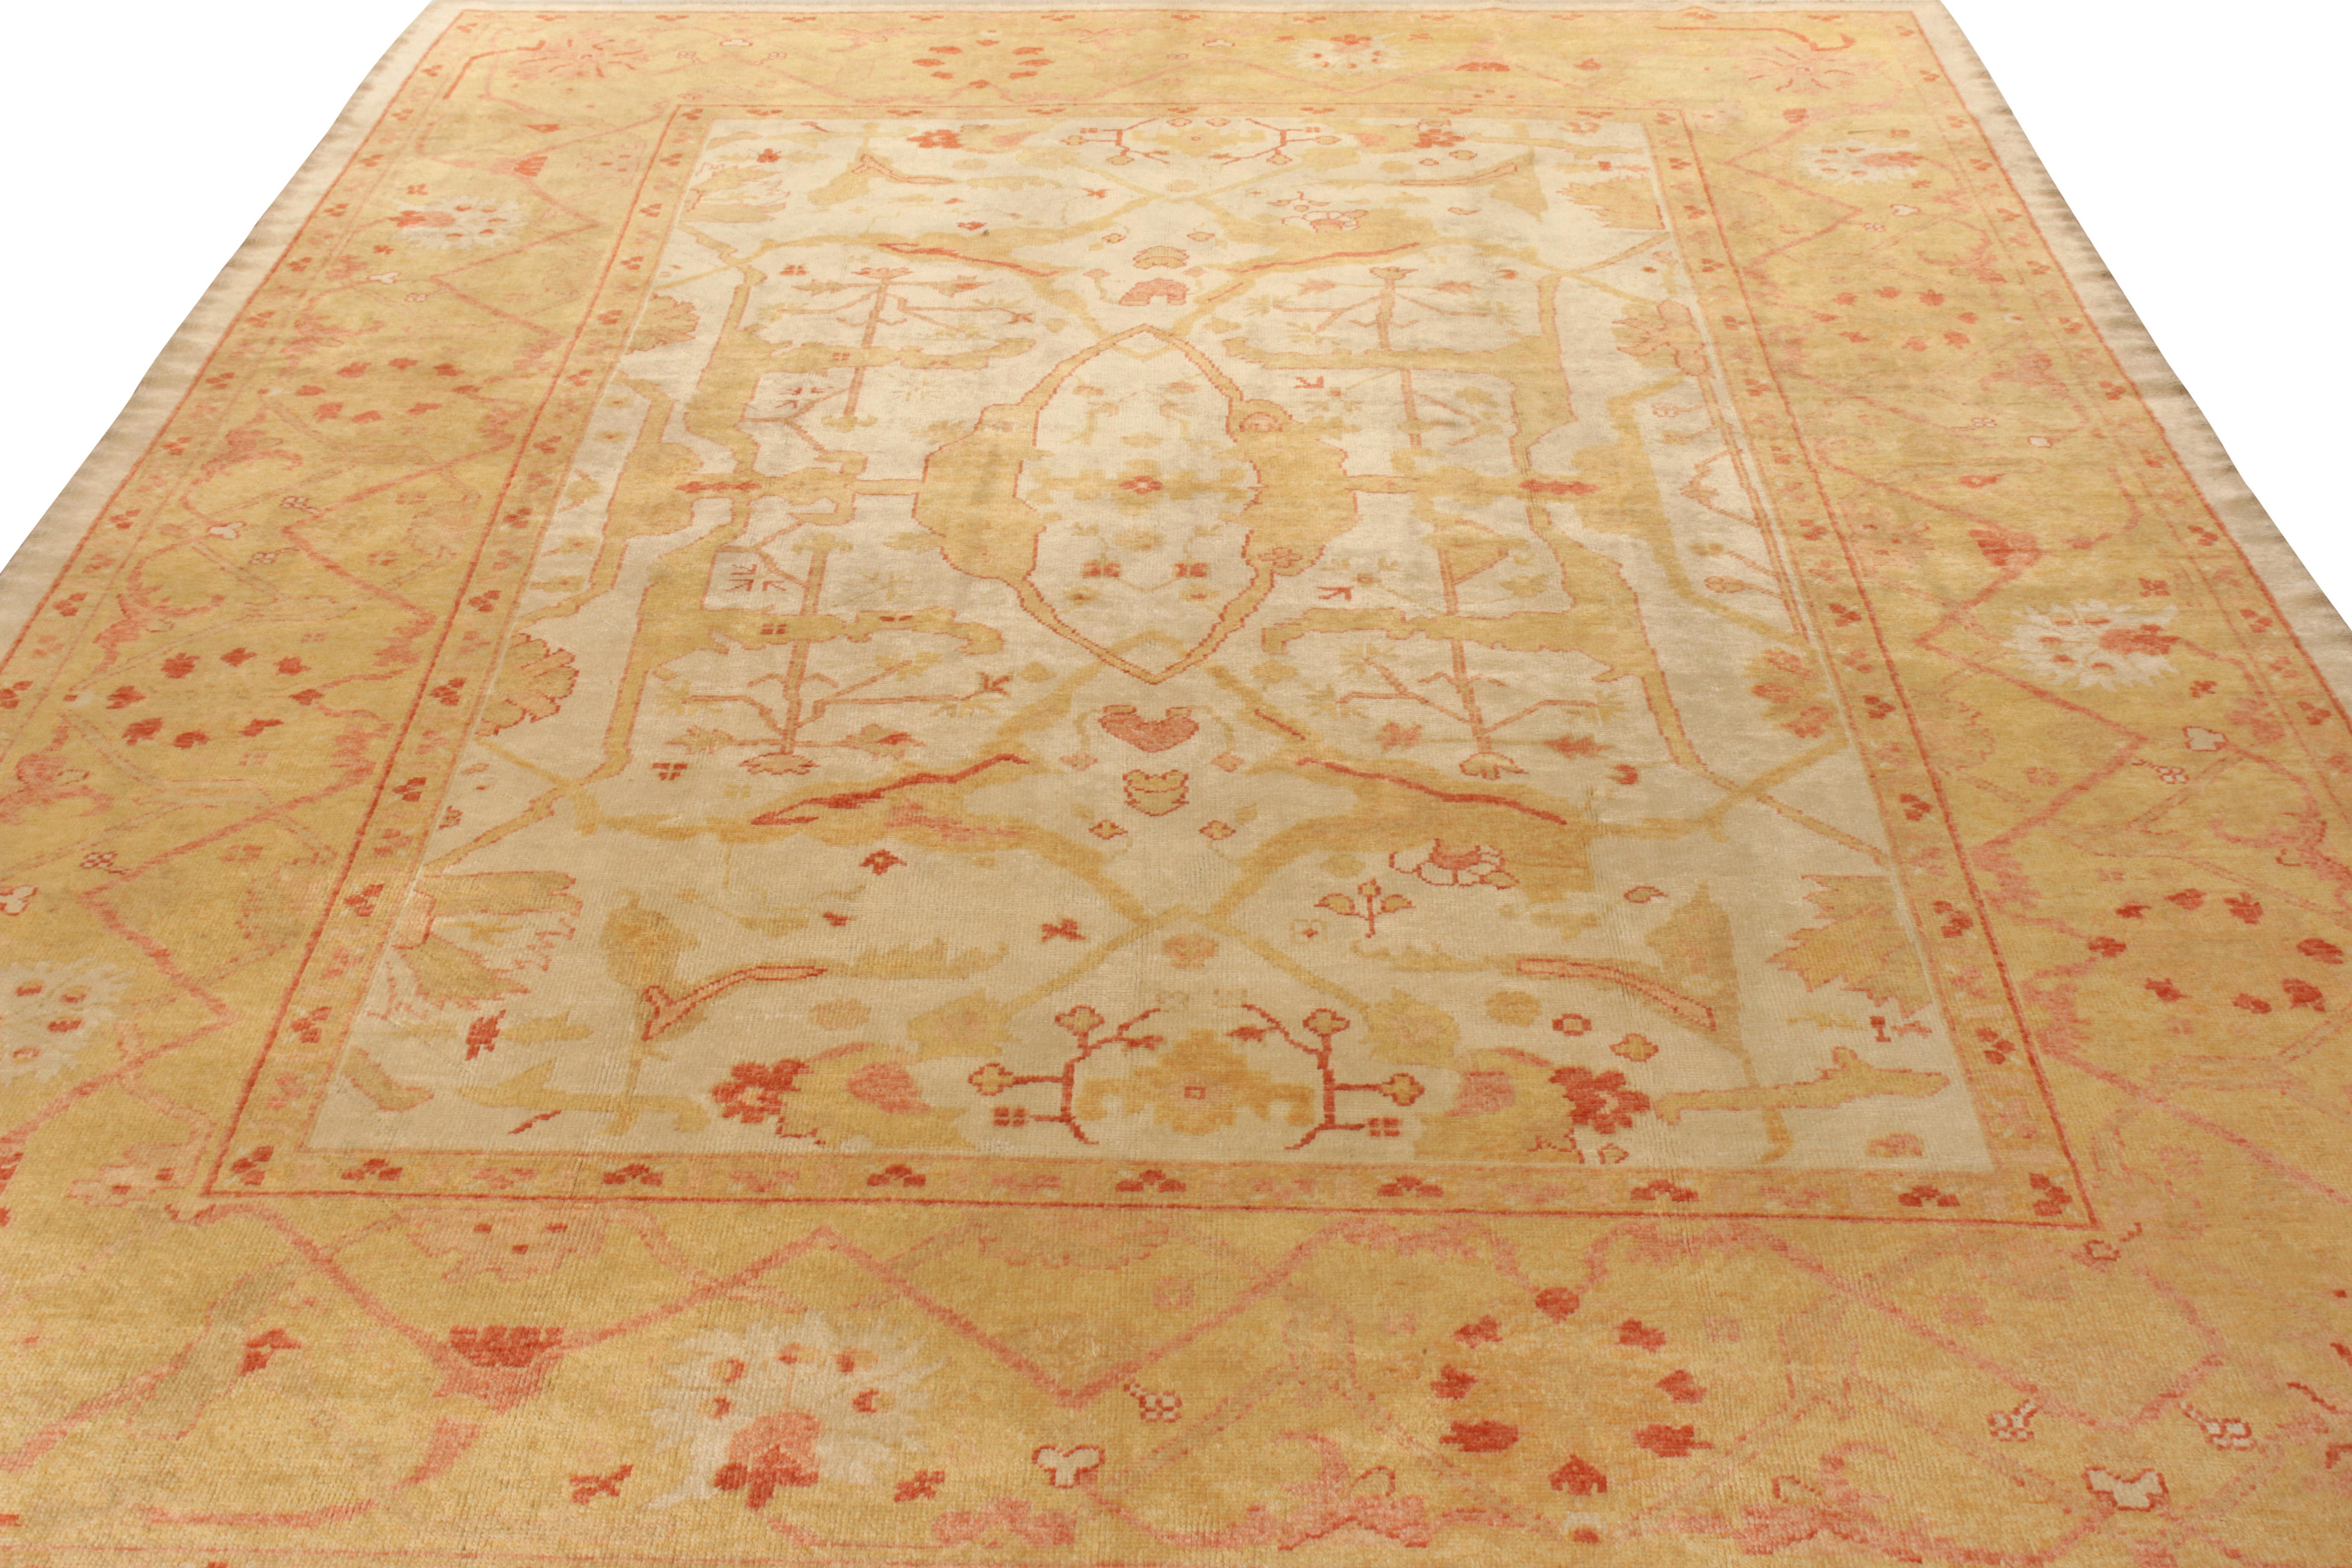 Hand knotted in wool originating from Turkey circa 1950-1960, this 10x13 vintage rug is a notably regal Oushak rug of rare color, exceptional scale, and elegant movement. Embodying classic rug aesthetics, the rug captures attention with a central